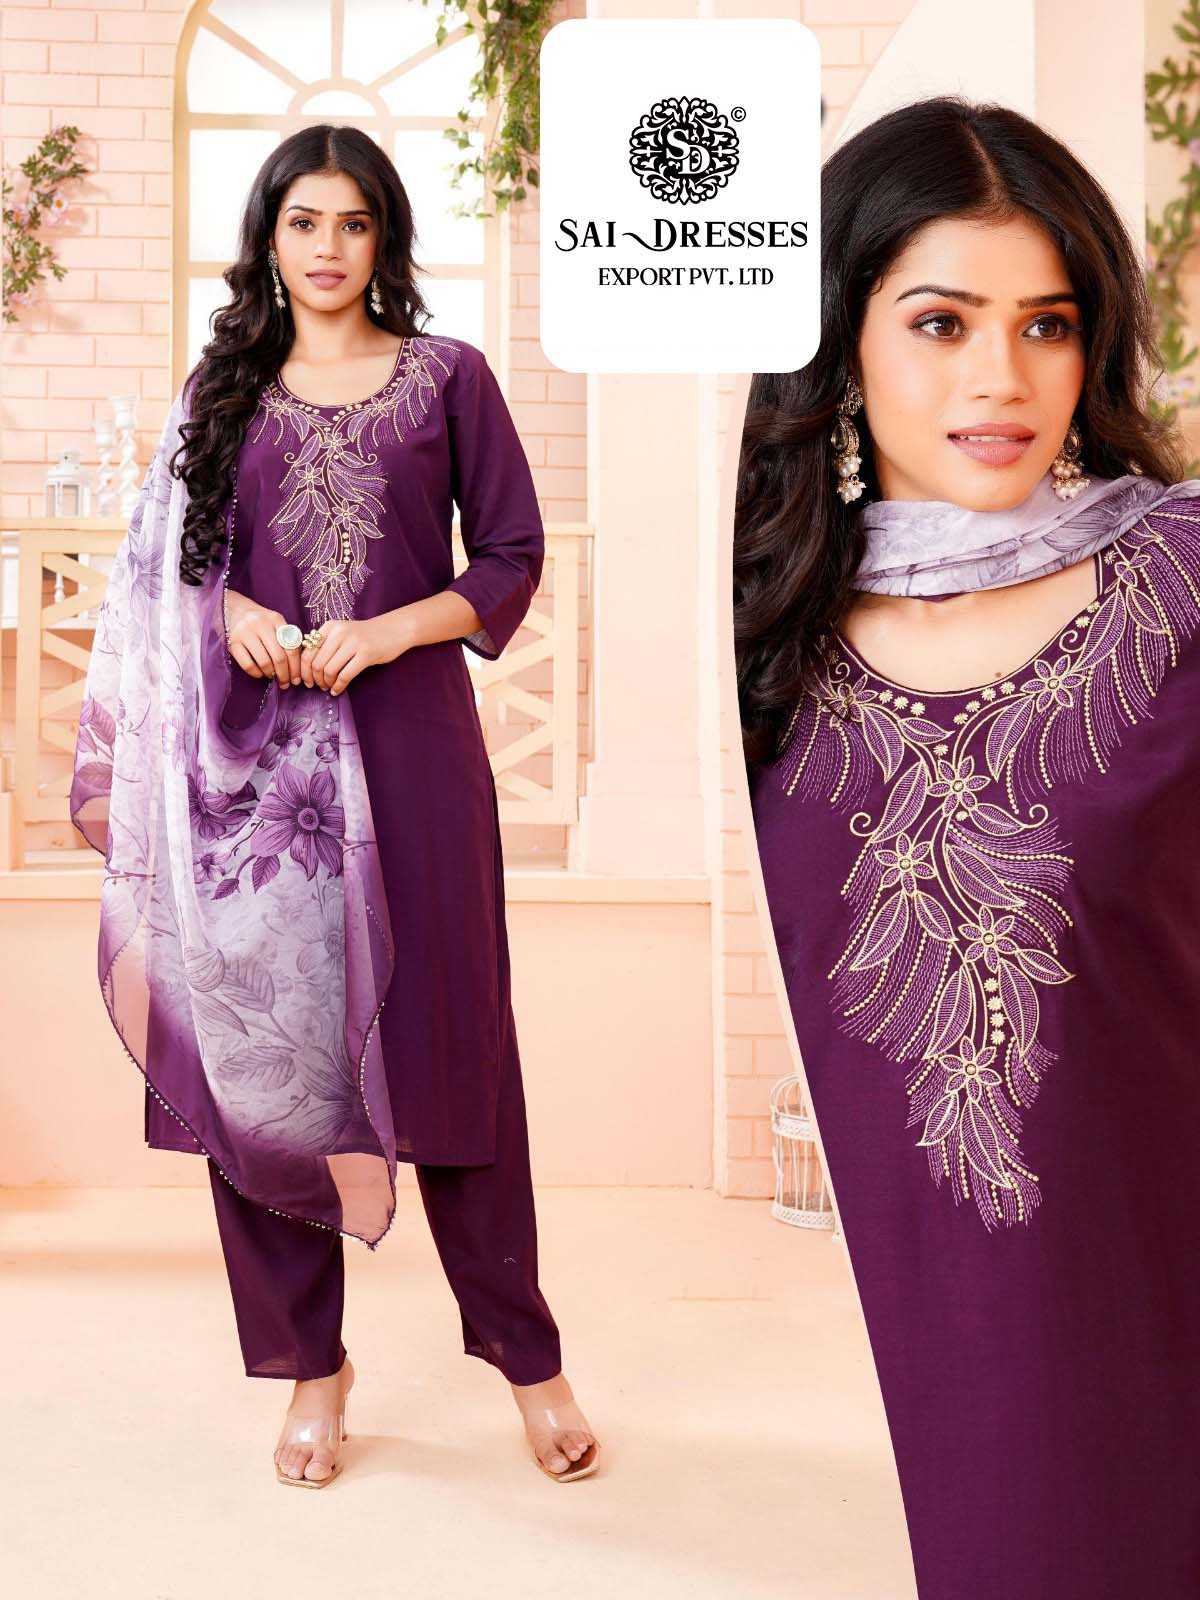  SAI DRESSES PRESENT D.NO 1995  READY TO DAILY  WEAR STRAIGHT CUT KURTI WITH PANT STYLE DESIGNER 3 PIECE COMBO SUITS IN WHOLESALE RATE  IN SURAT